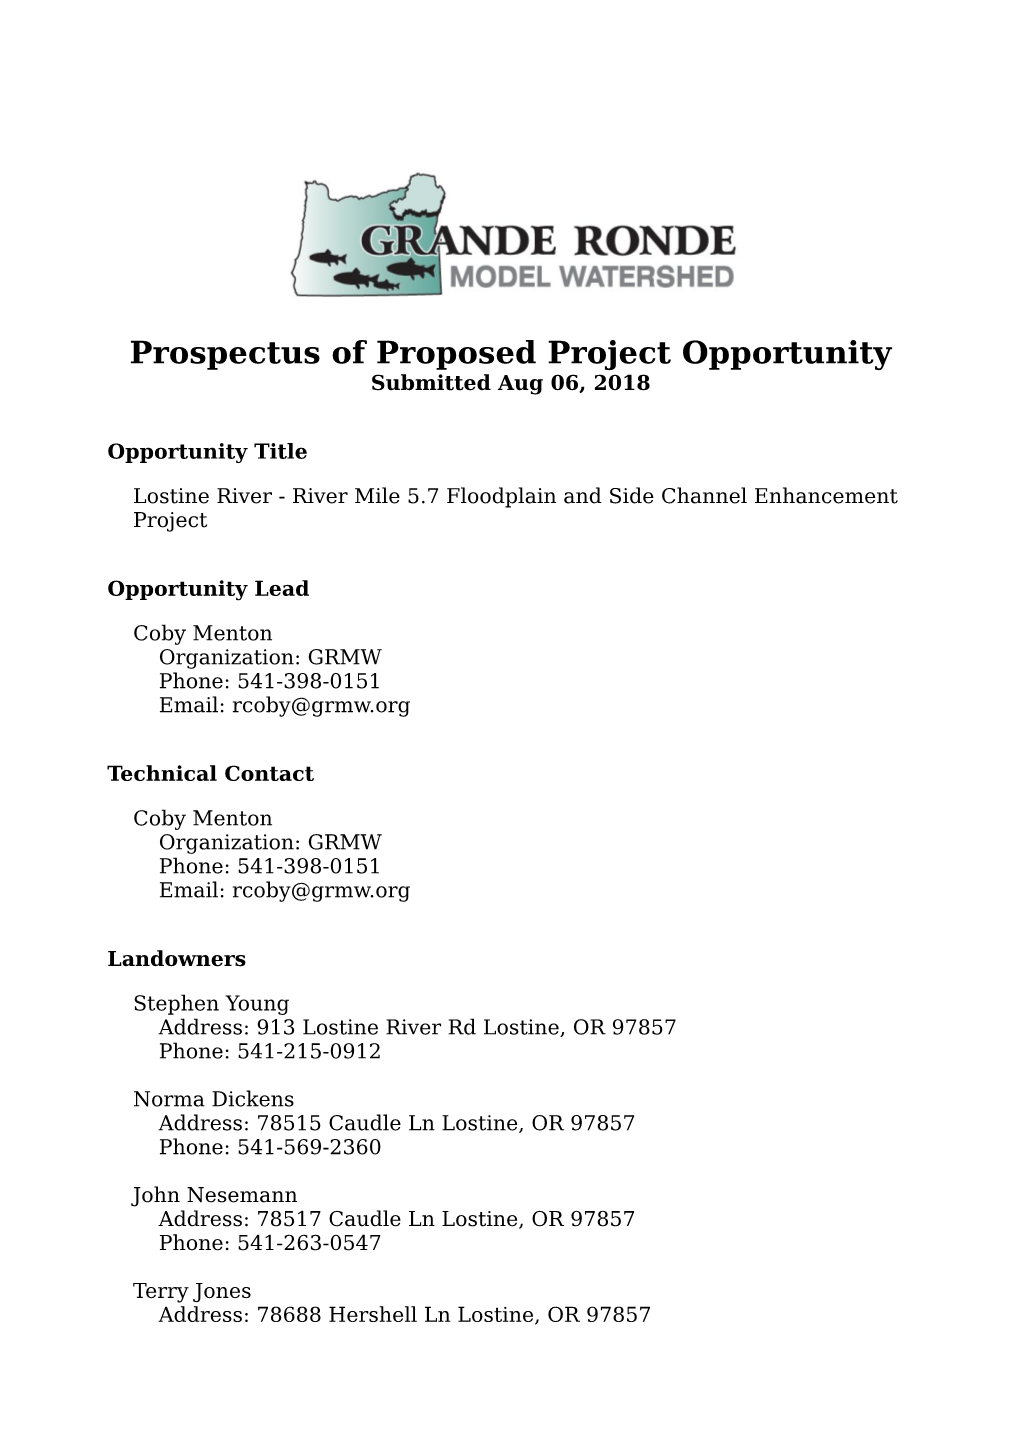 Prospectus of Proposed Project Opportunity Submitted Aug 06, 2018